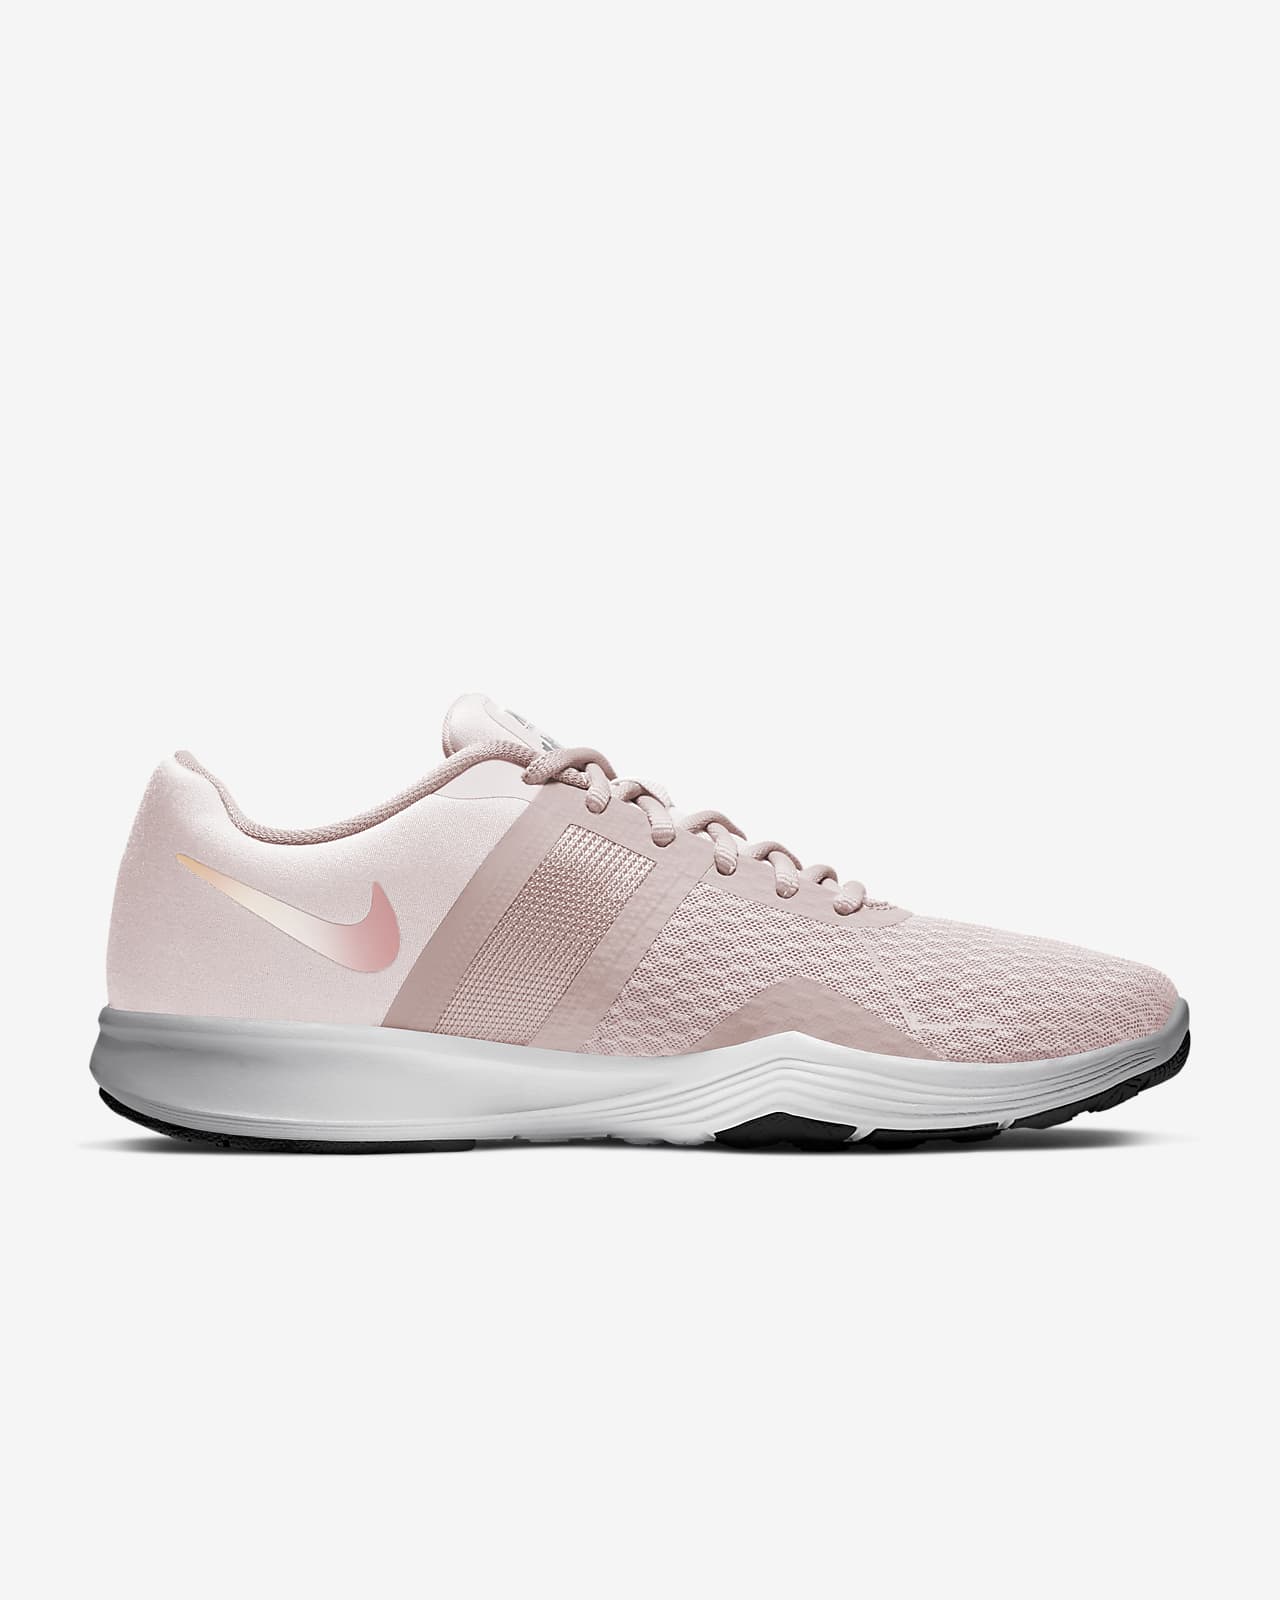 nike city trainer 2 women's review